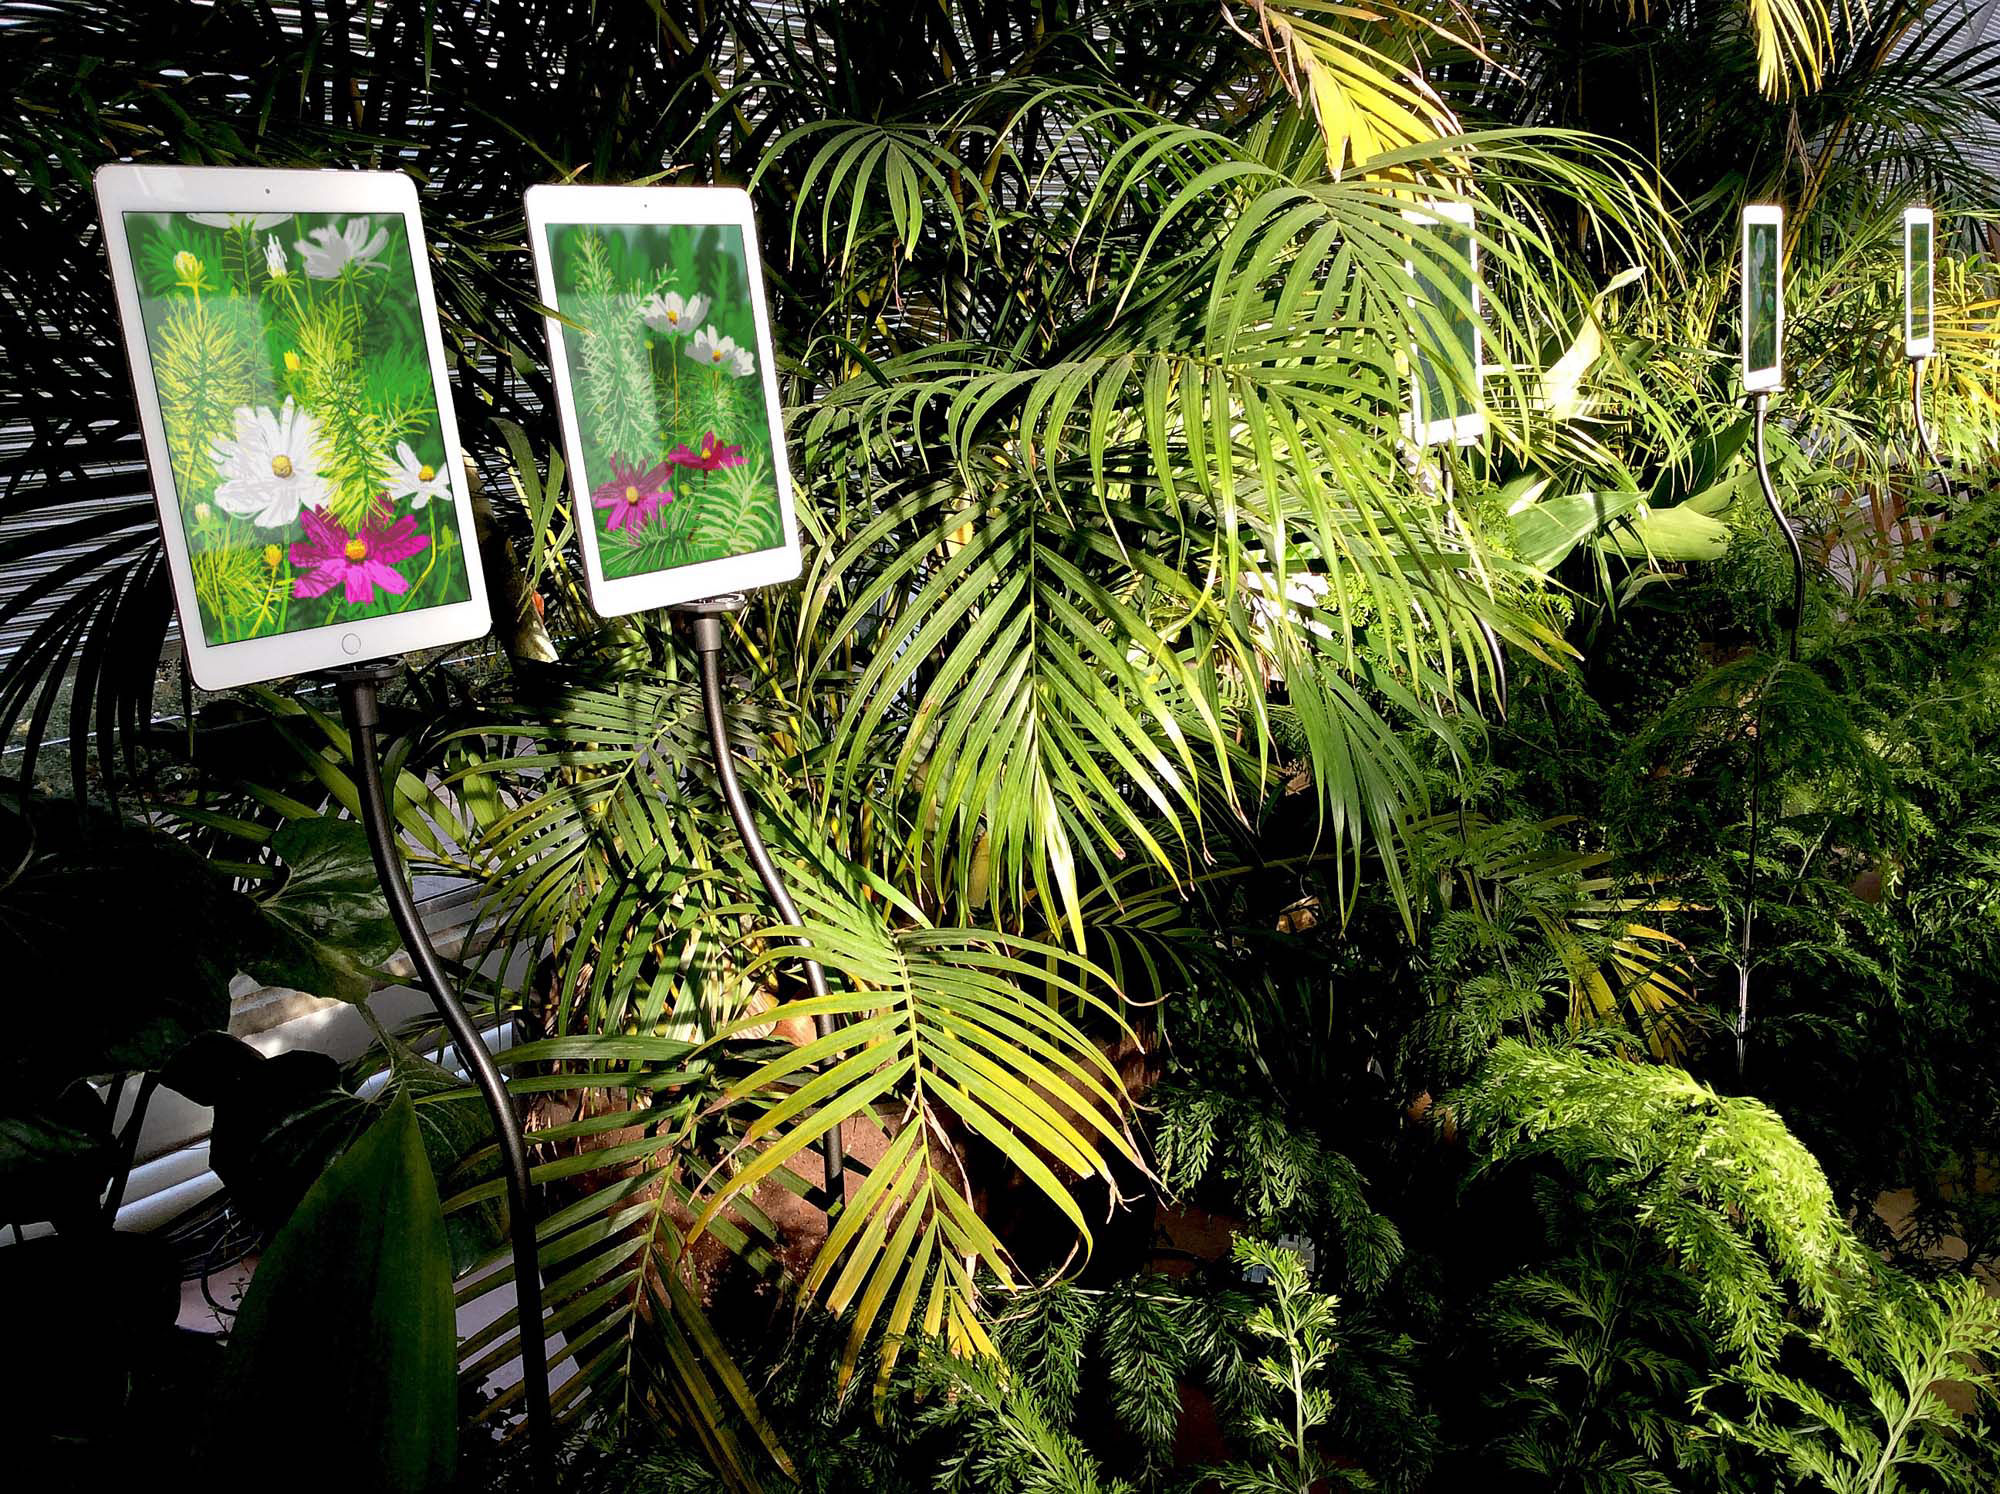 Andy Maitland, 'The Digital Garden 2019' at the Royal Horticultural Society Garden, Wisley, UK